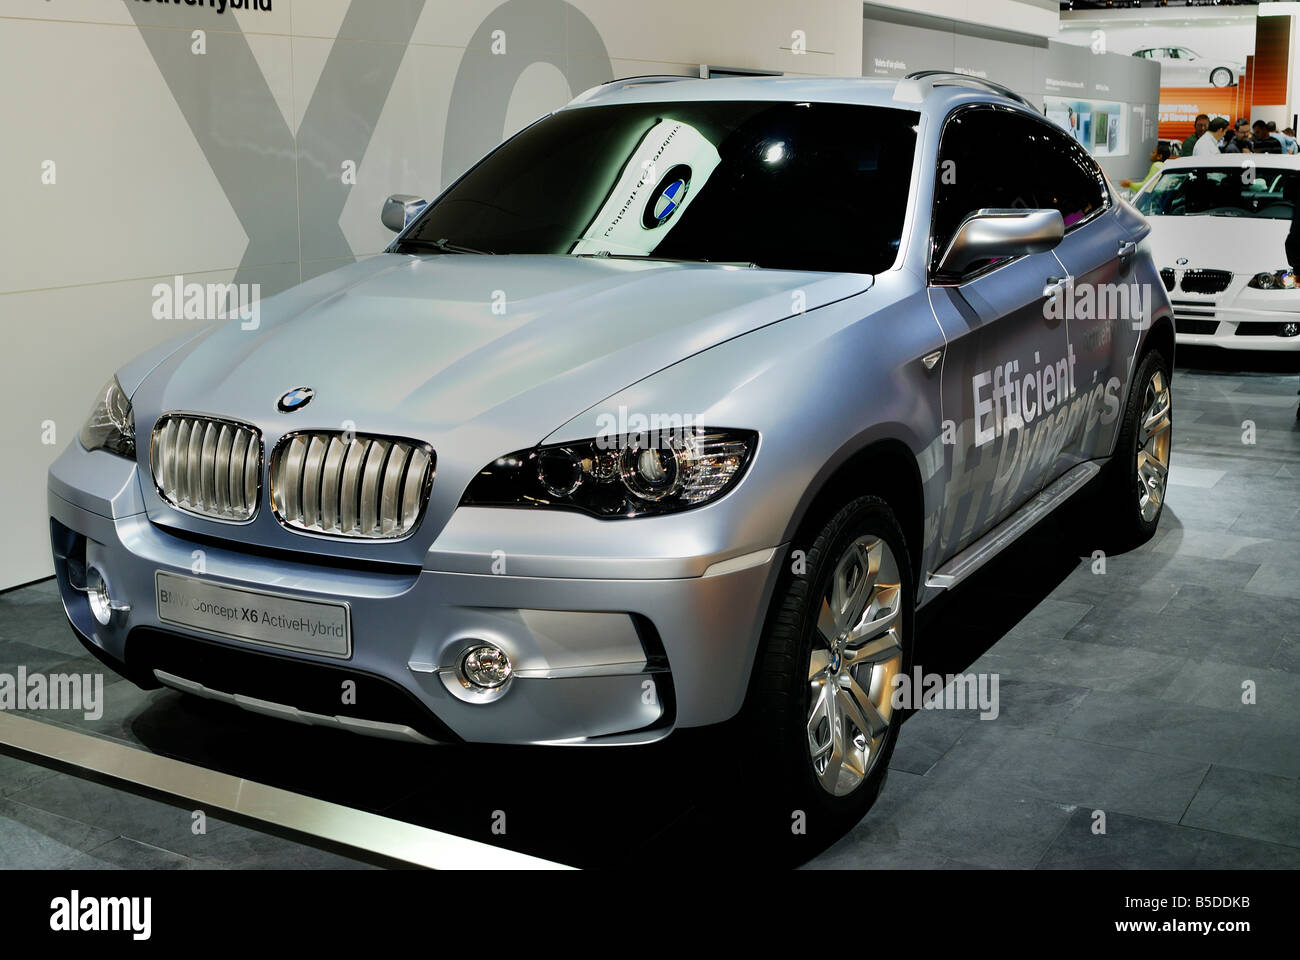 Paris France, low carbon cars Hybrid Motor, 'Concept Car' BMW X6 ActiveHybrid 'SUV' cleaner cars, on display in Car Show, energy efficiency Stock Photo